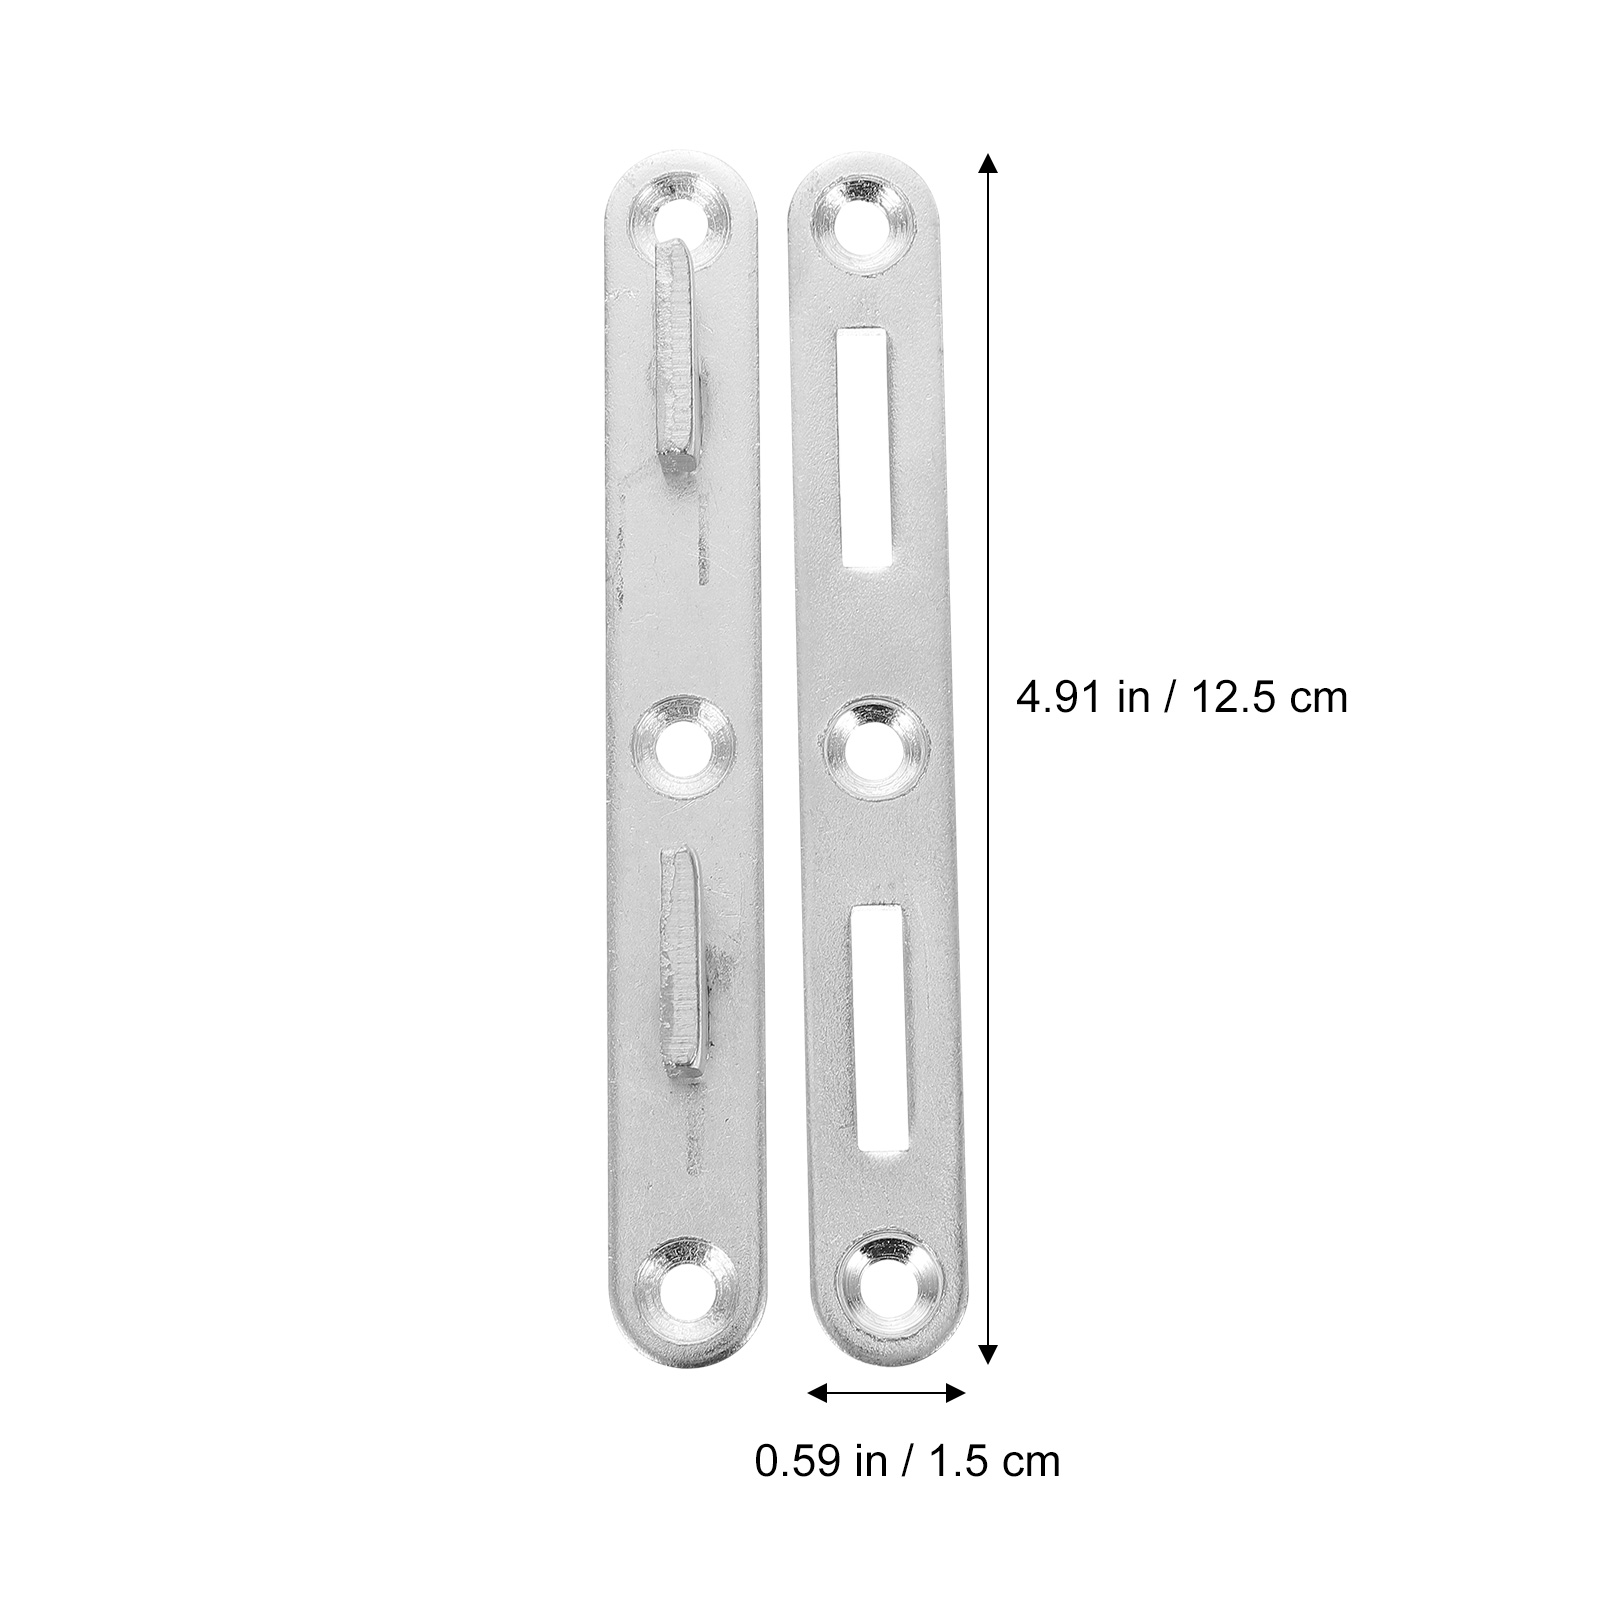 Bed Rail Brackets Fittings Frame Wood Furniture Brackets Hook Connectinghardwares Support Mounting Footboard Headboard - image 2 of 6